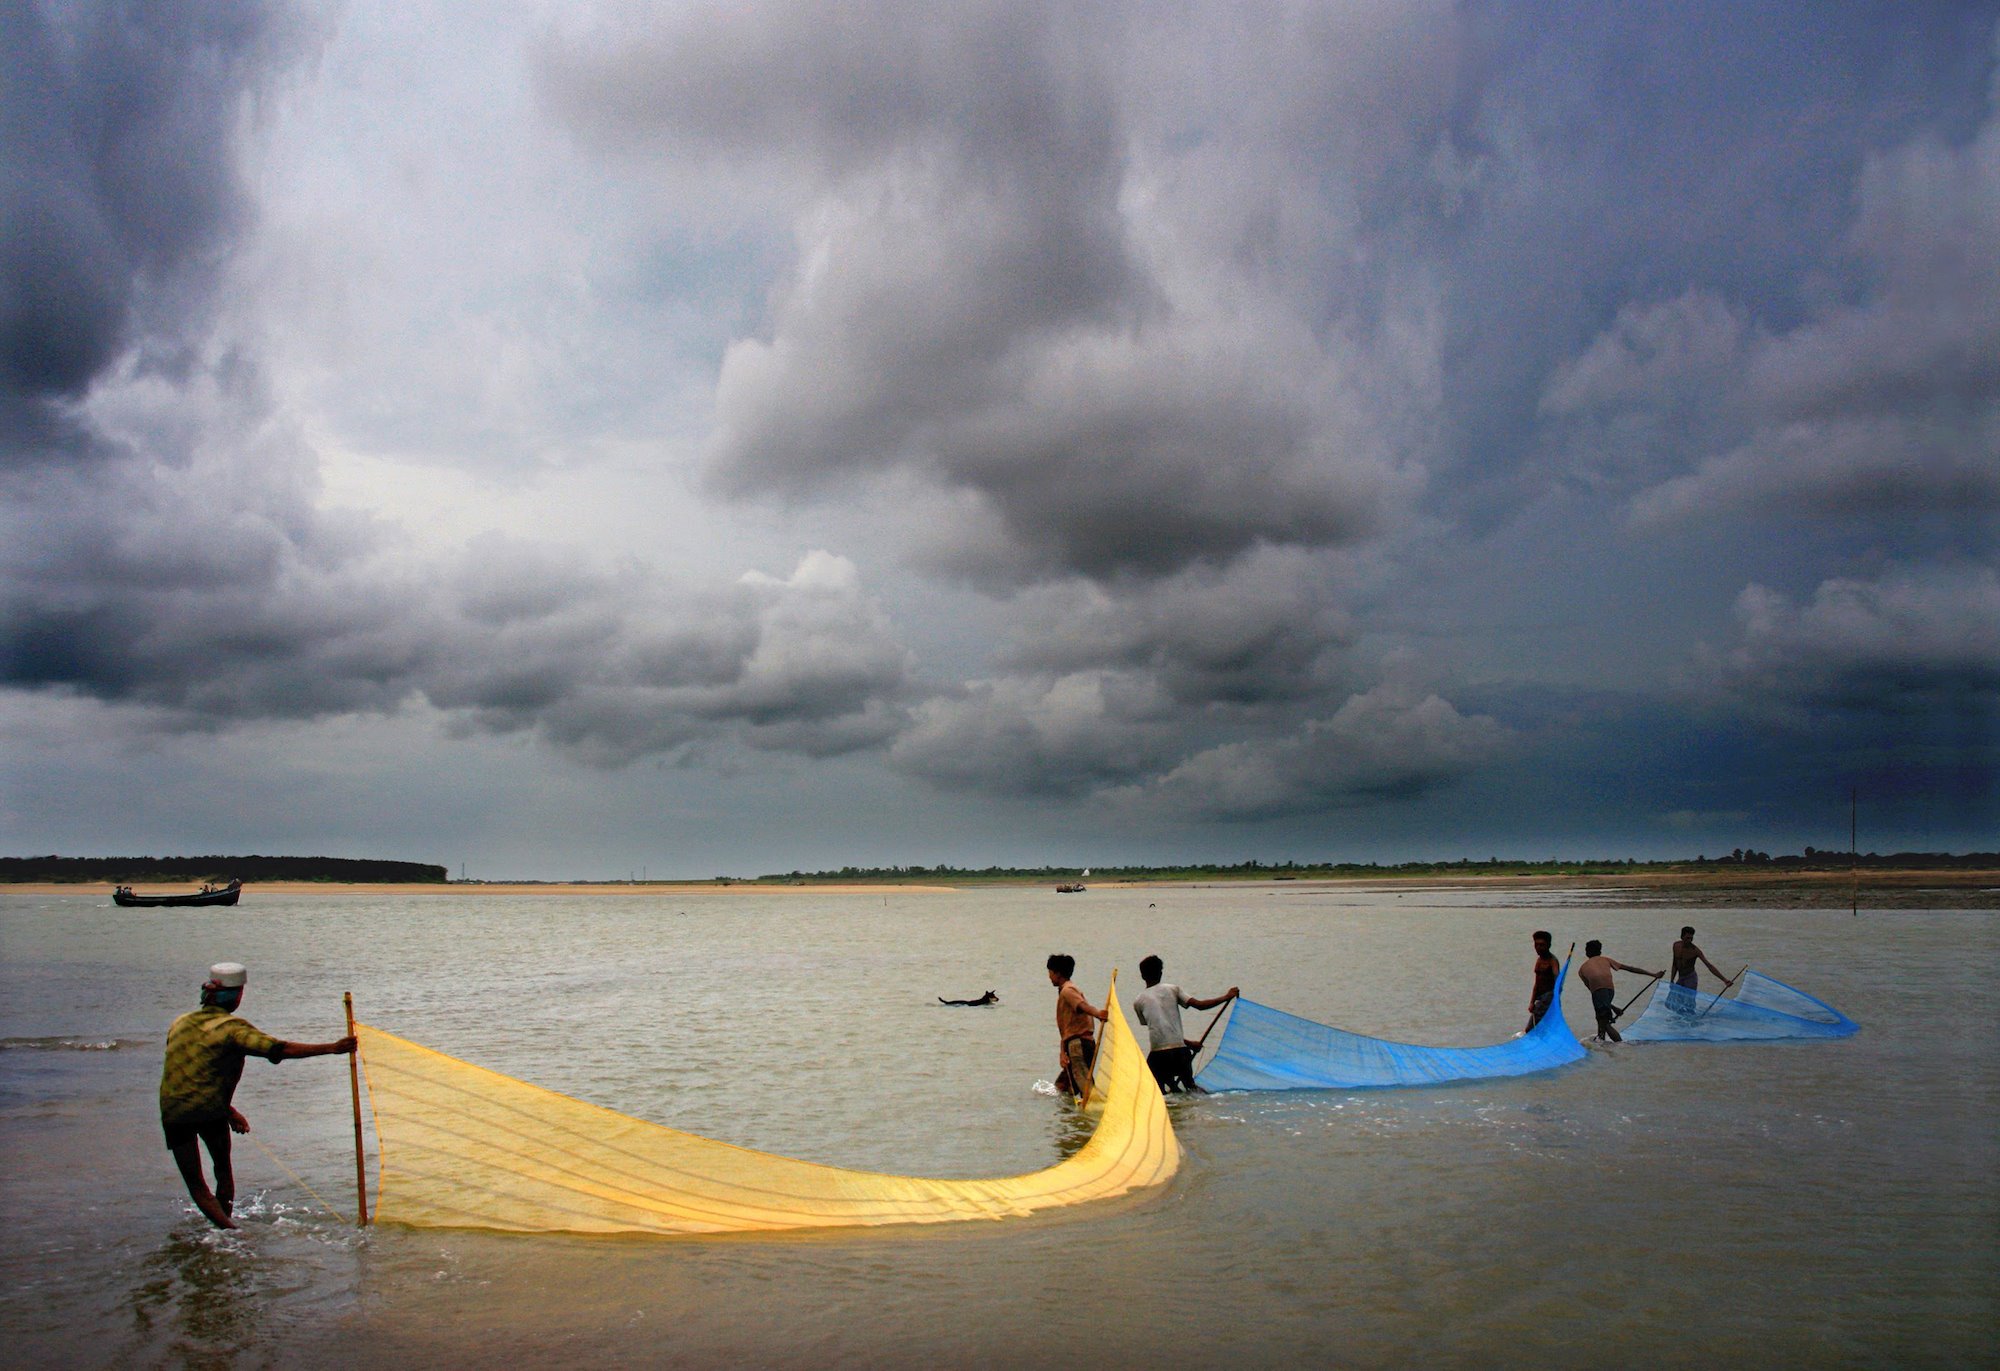 People pulling fishing nets into the ocean in front of storm clouds